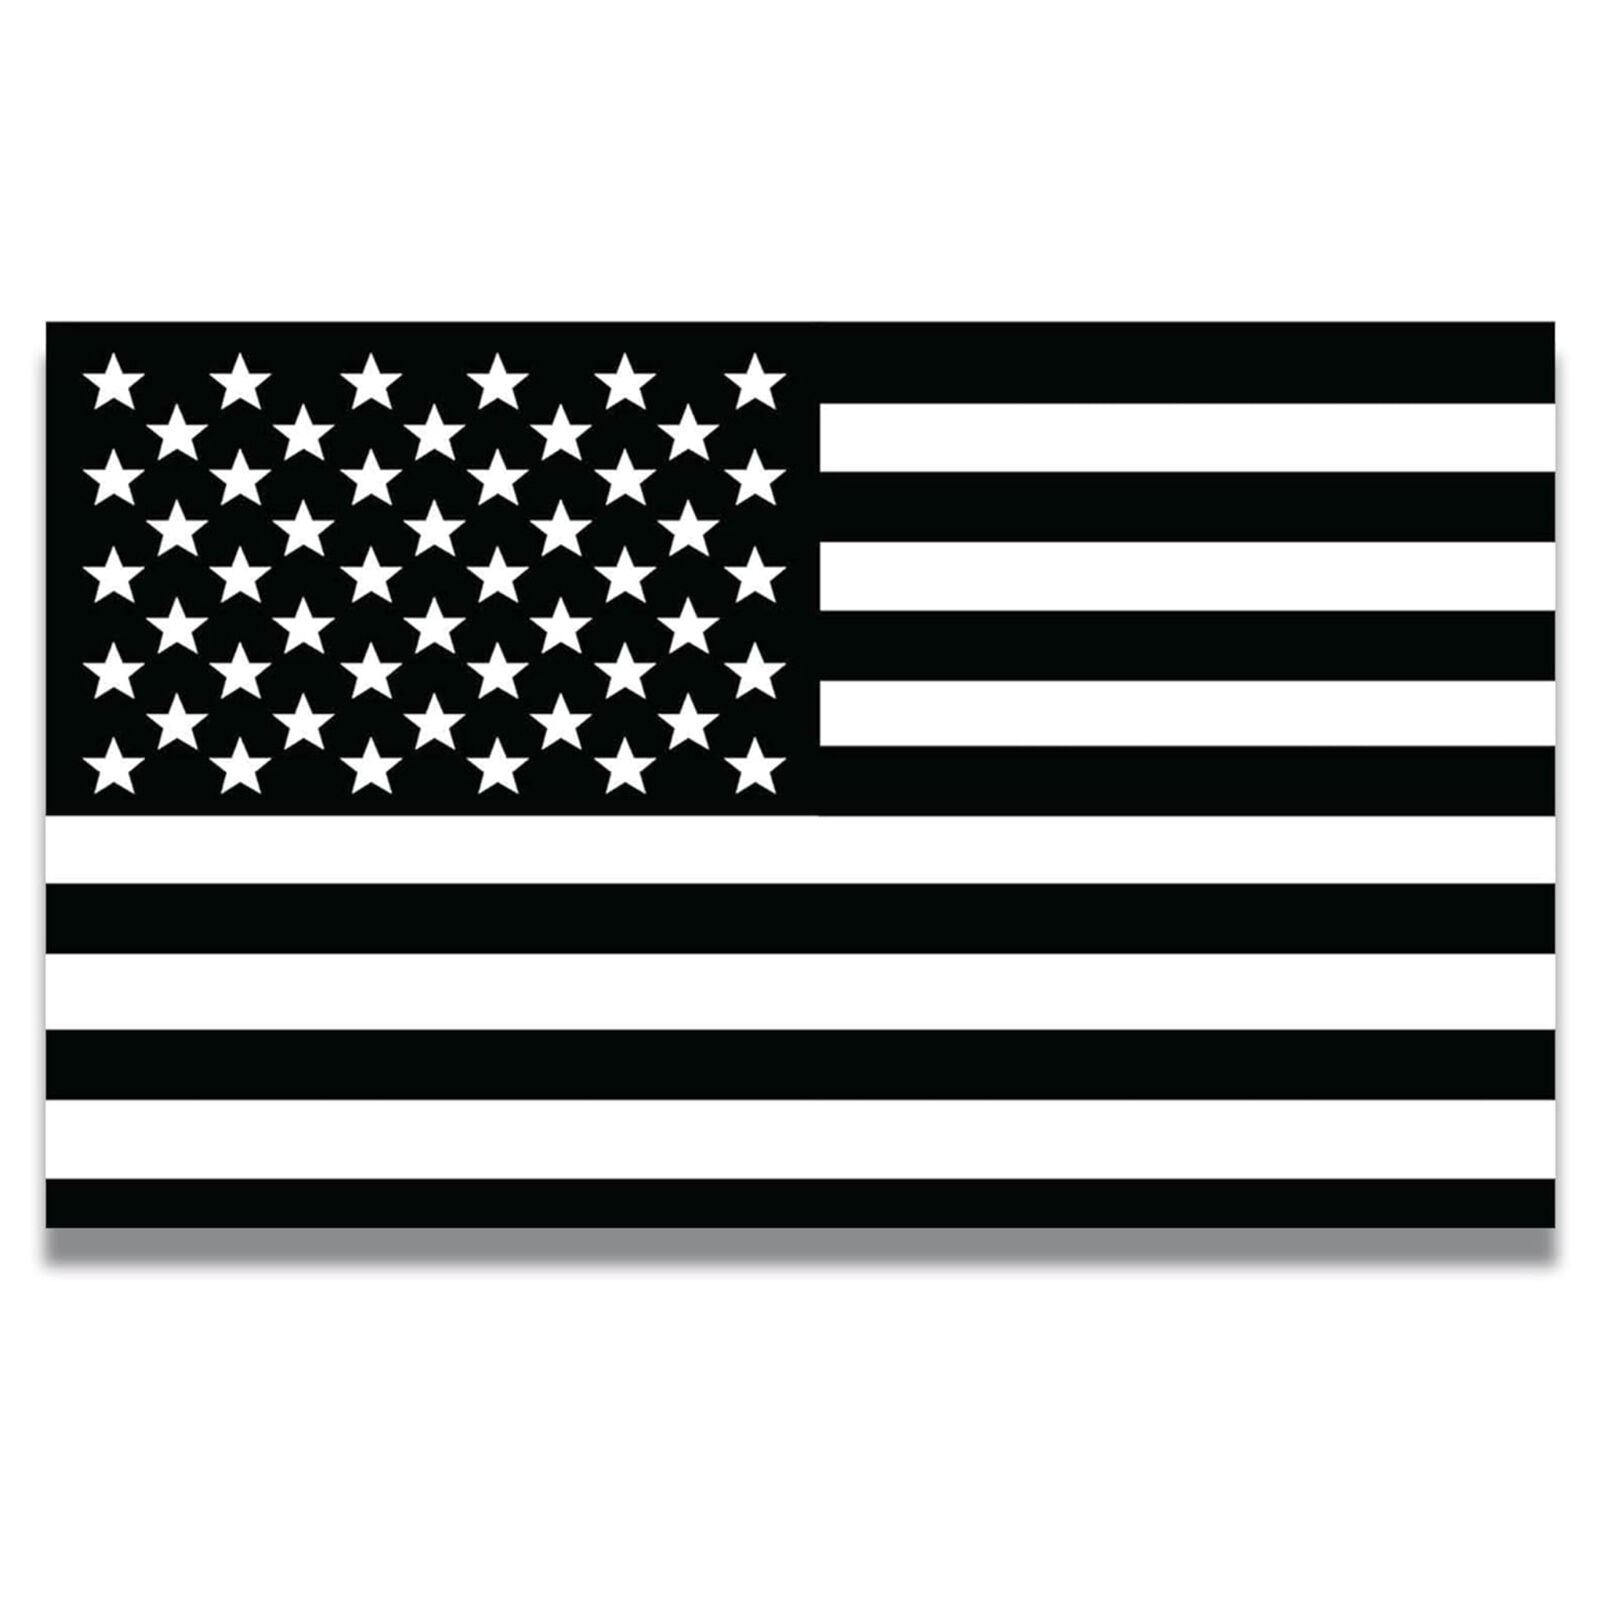 Black and White American Flag Magnet Decal, 3x5 Inches Automotive Magnet for Car